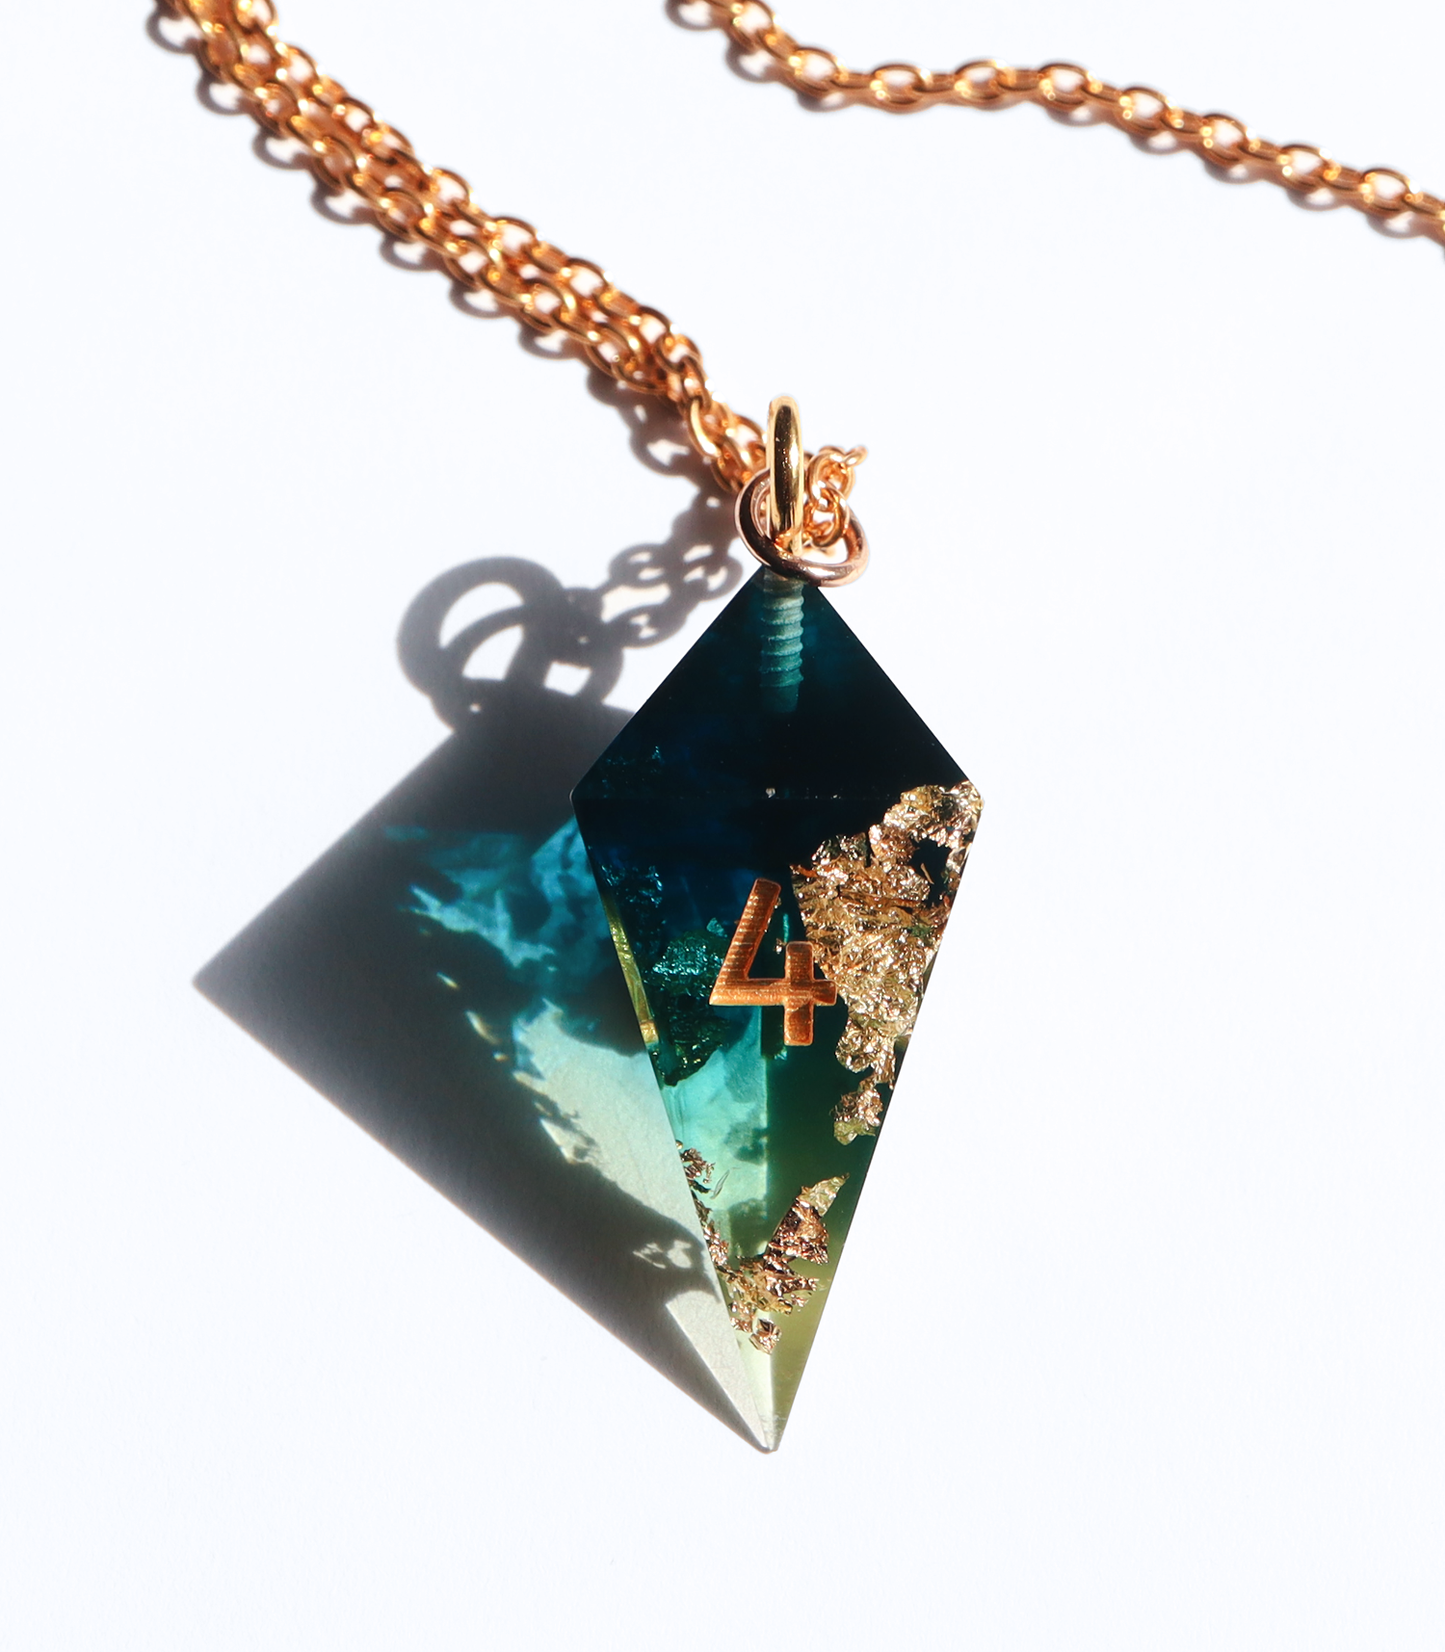 Crystal D4 Necklace - Sublime Blight